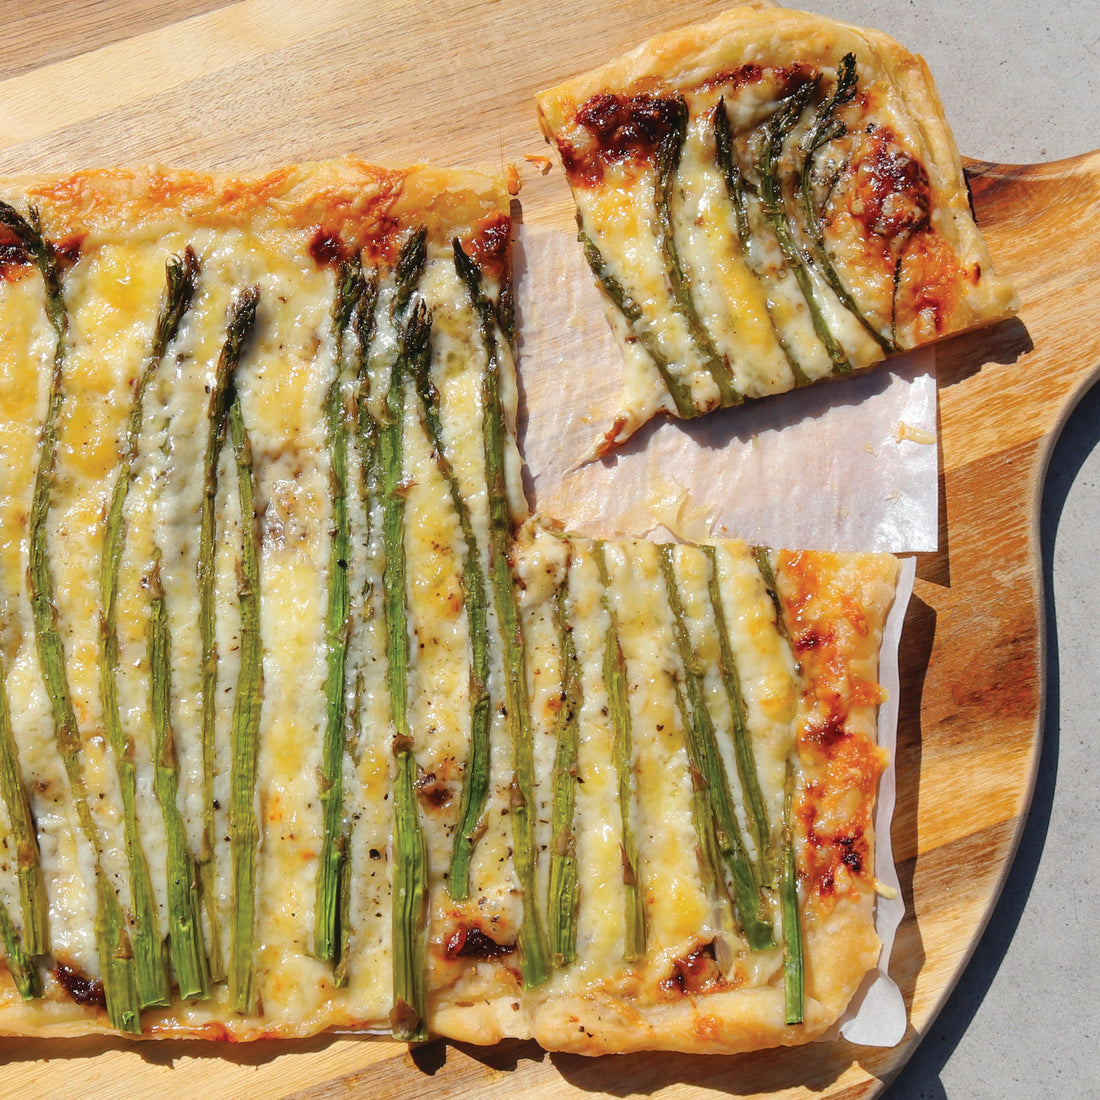 Cheesy Asparagus Puff Pastry with Caramelized Onion Jam